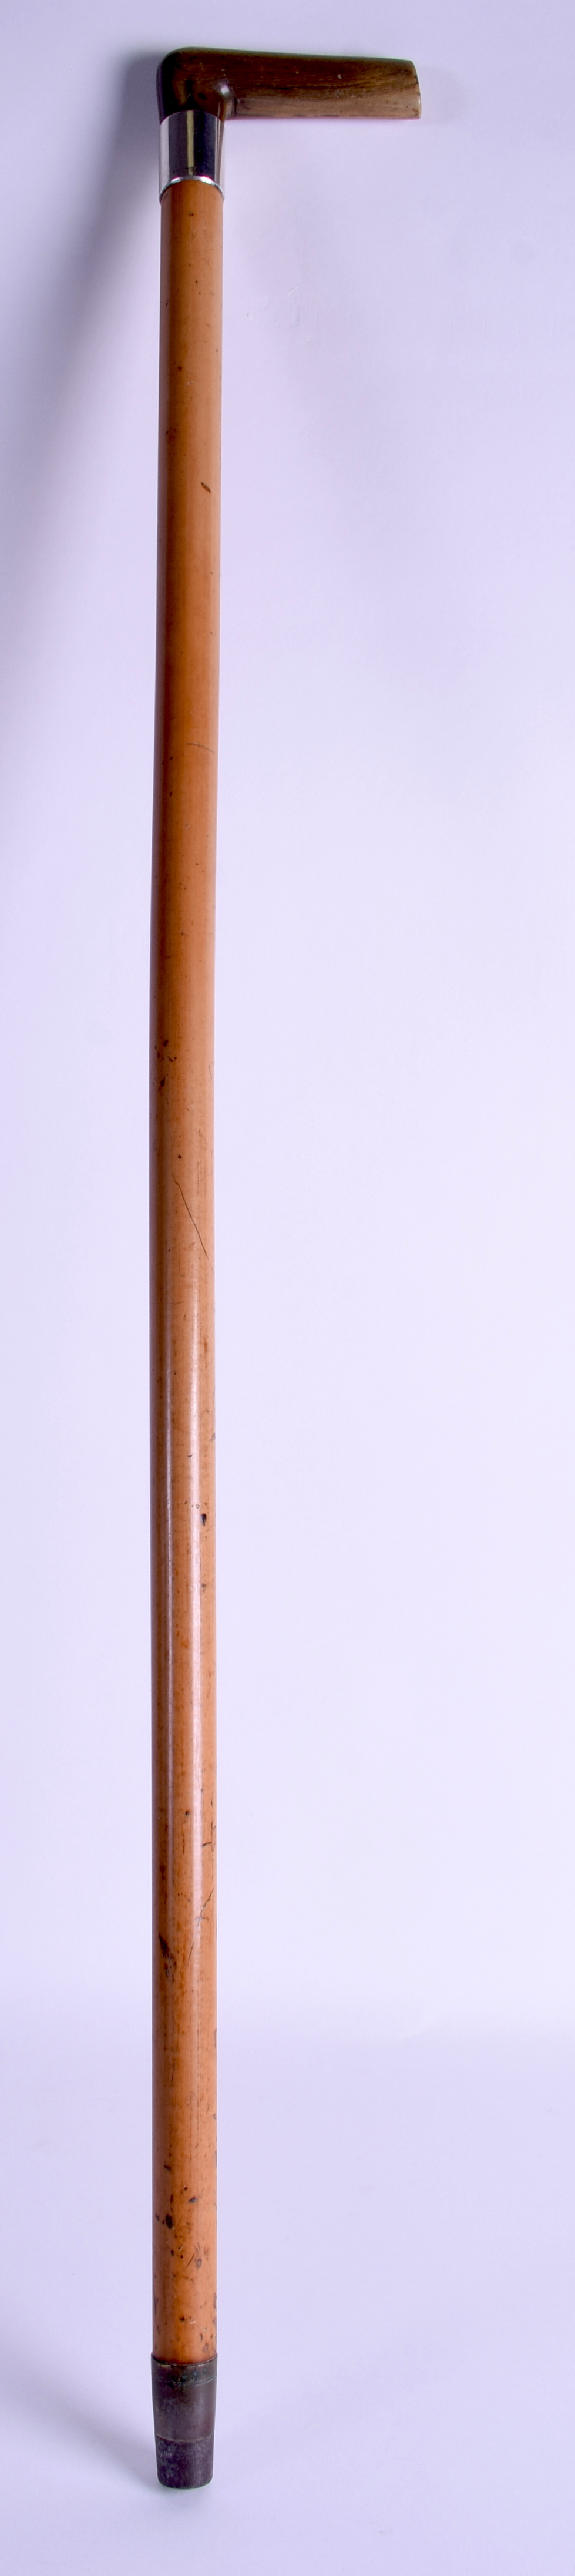 AN ANTIQUE CARVED RHINOCEROS HORN HANDLED WALKING CANE of straight form. 88 cm long. - Image 3 of 3